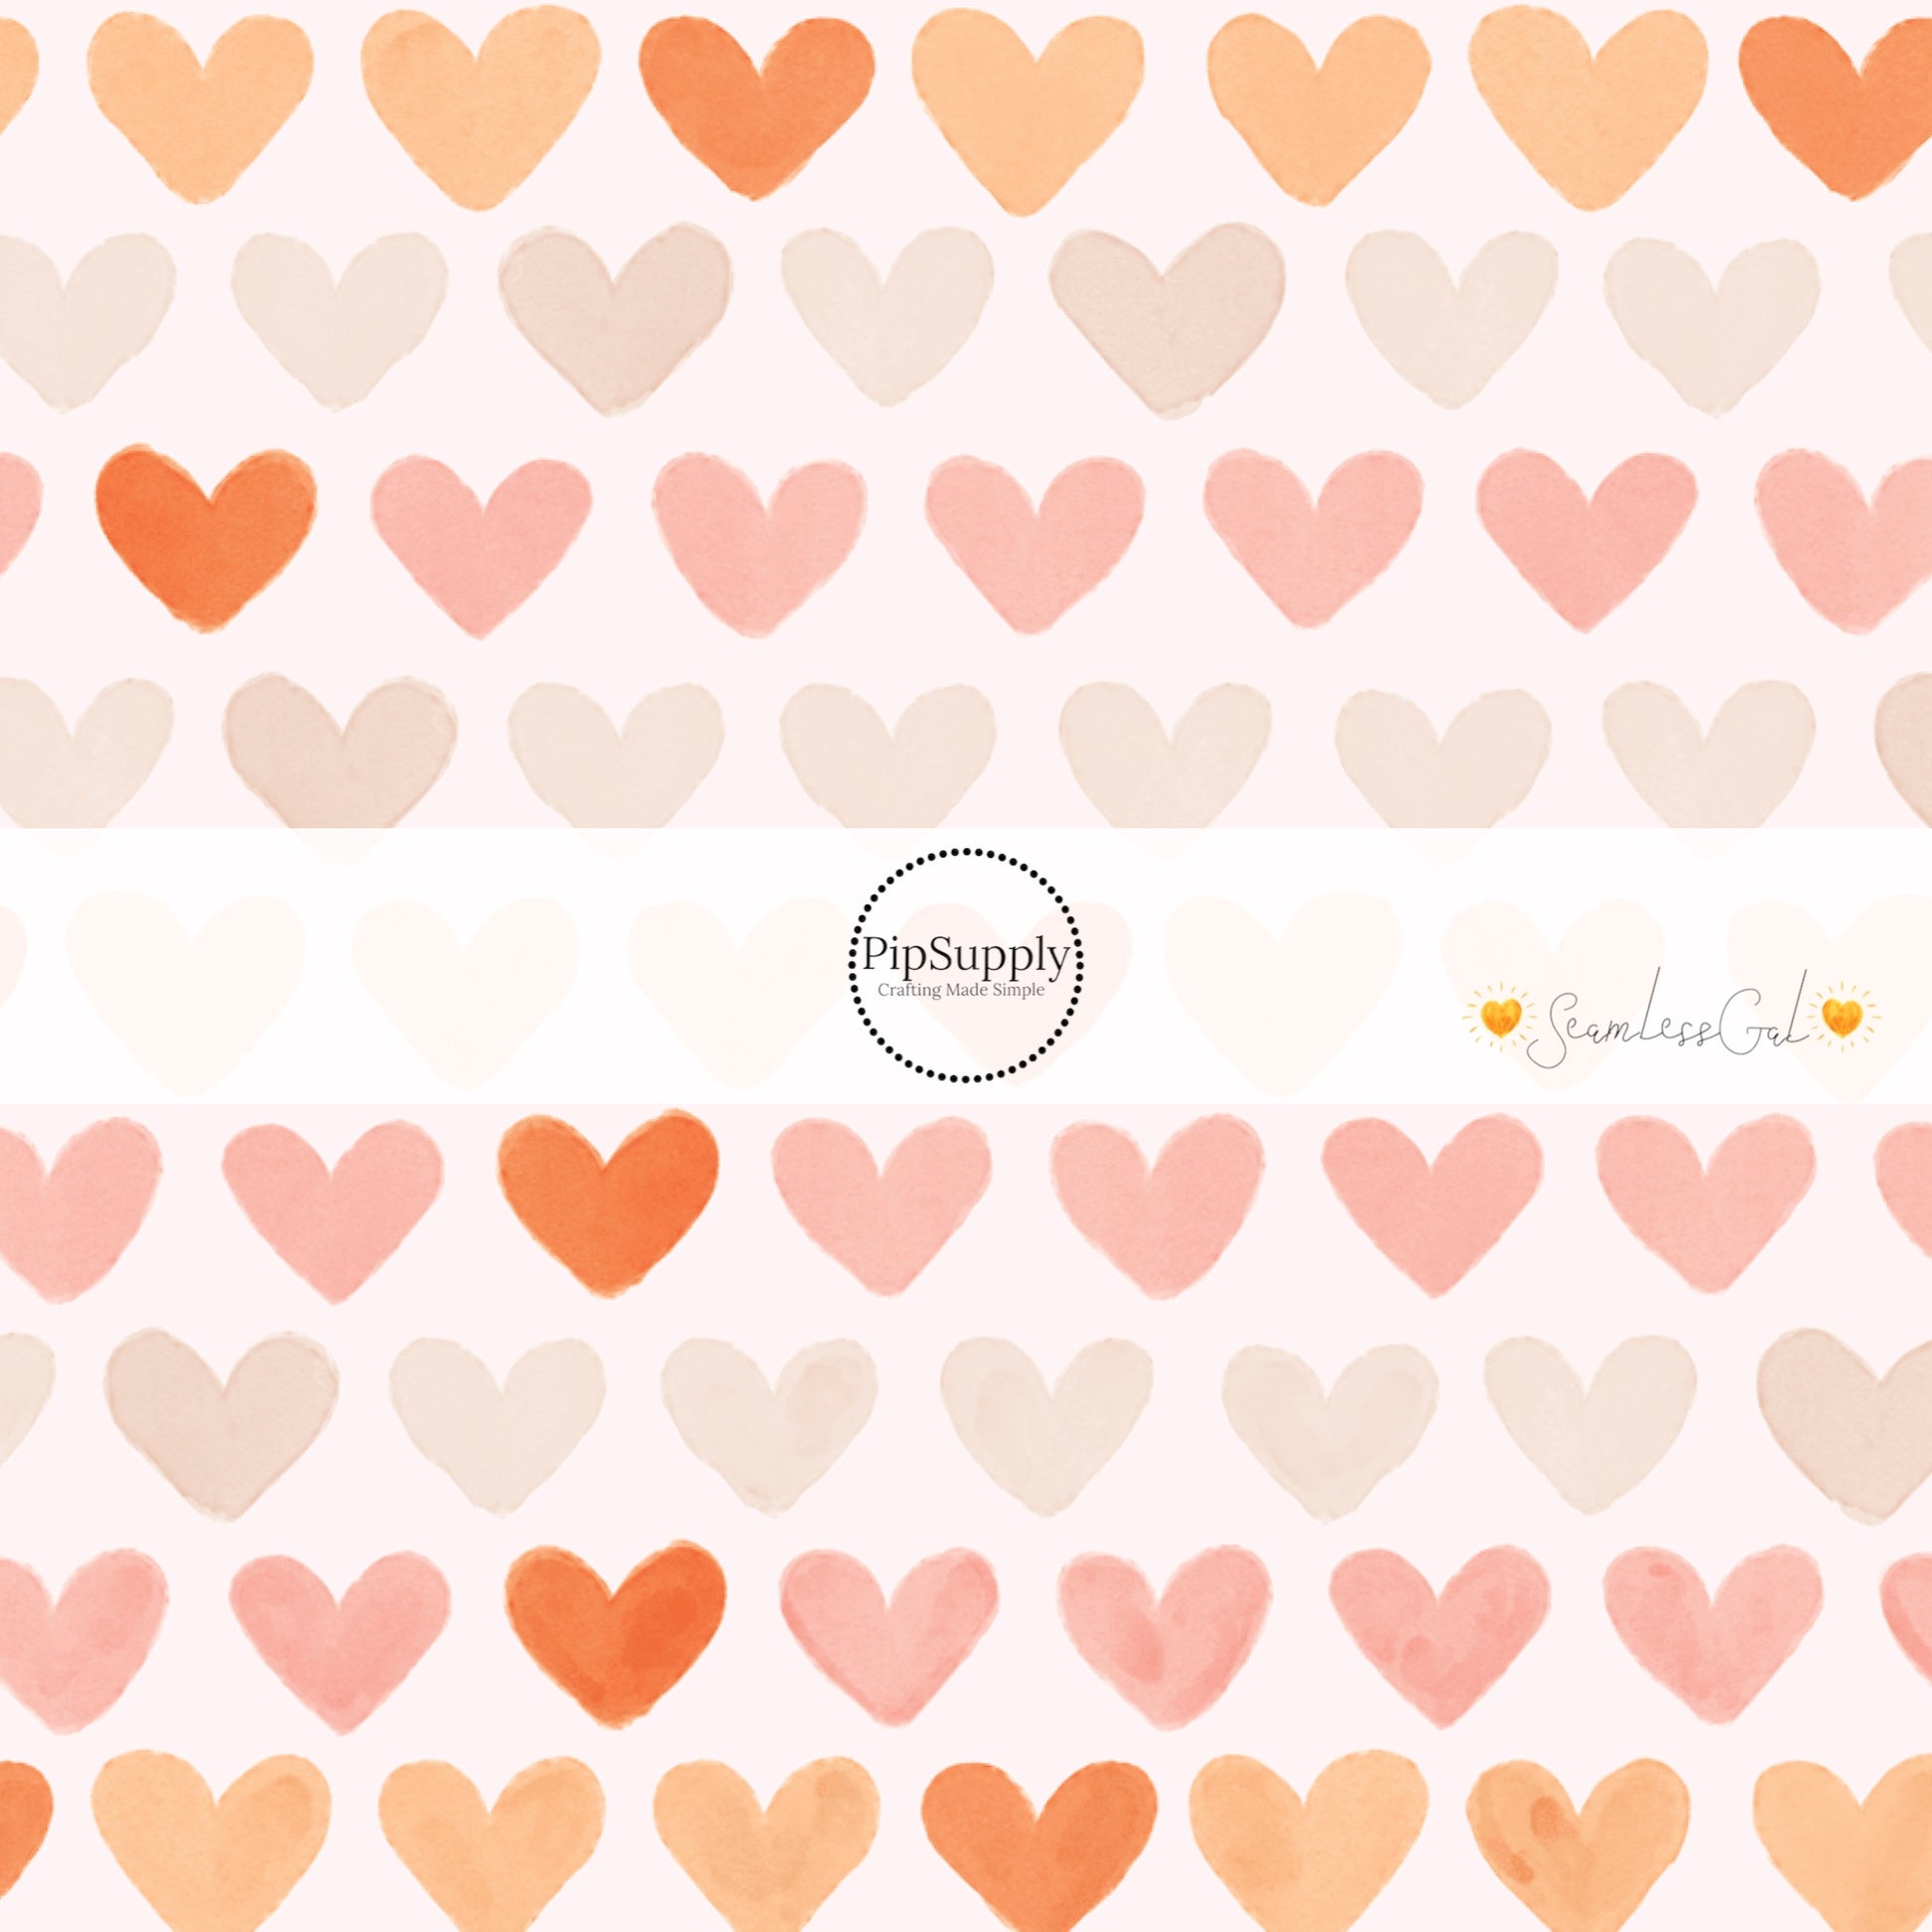 Pale Pink Fabric with Peach, Orange, Beige Watercolor Hearts